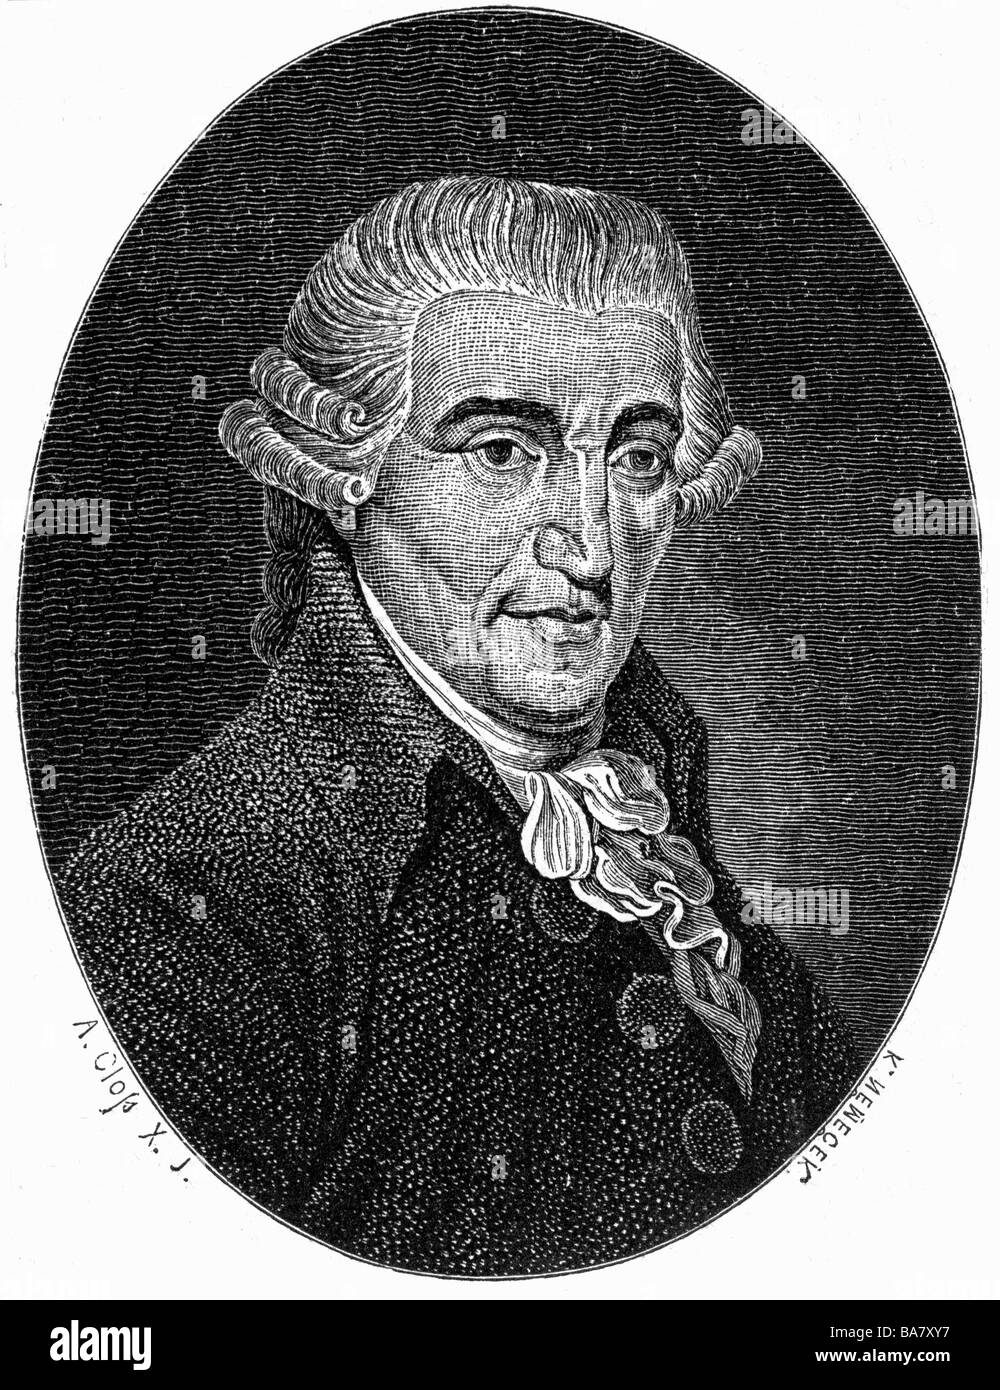 Haydn, Joseph, 31.3.1732 - 31.5.1809, Austrian composer, portrait, wood engraving by Cloß after drawing by Nemecek, 19th century,  , Stock Photo